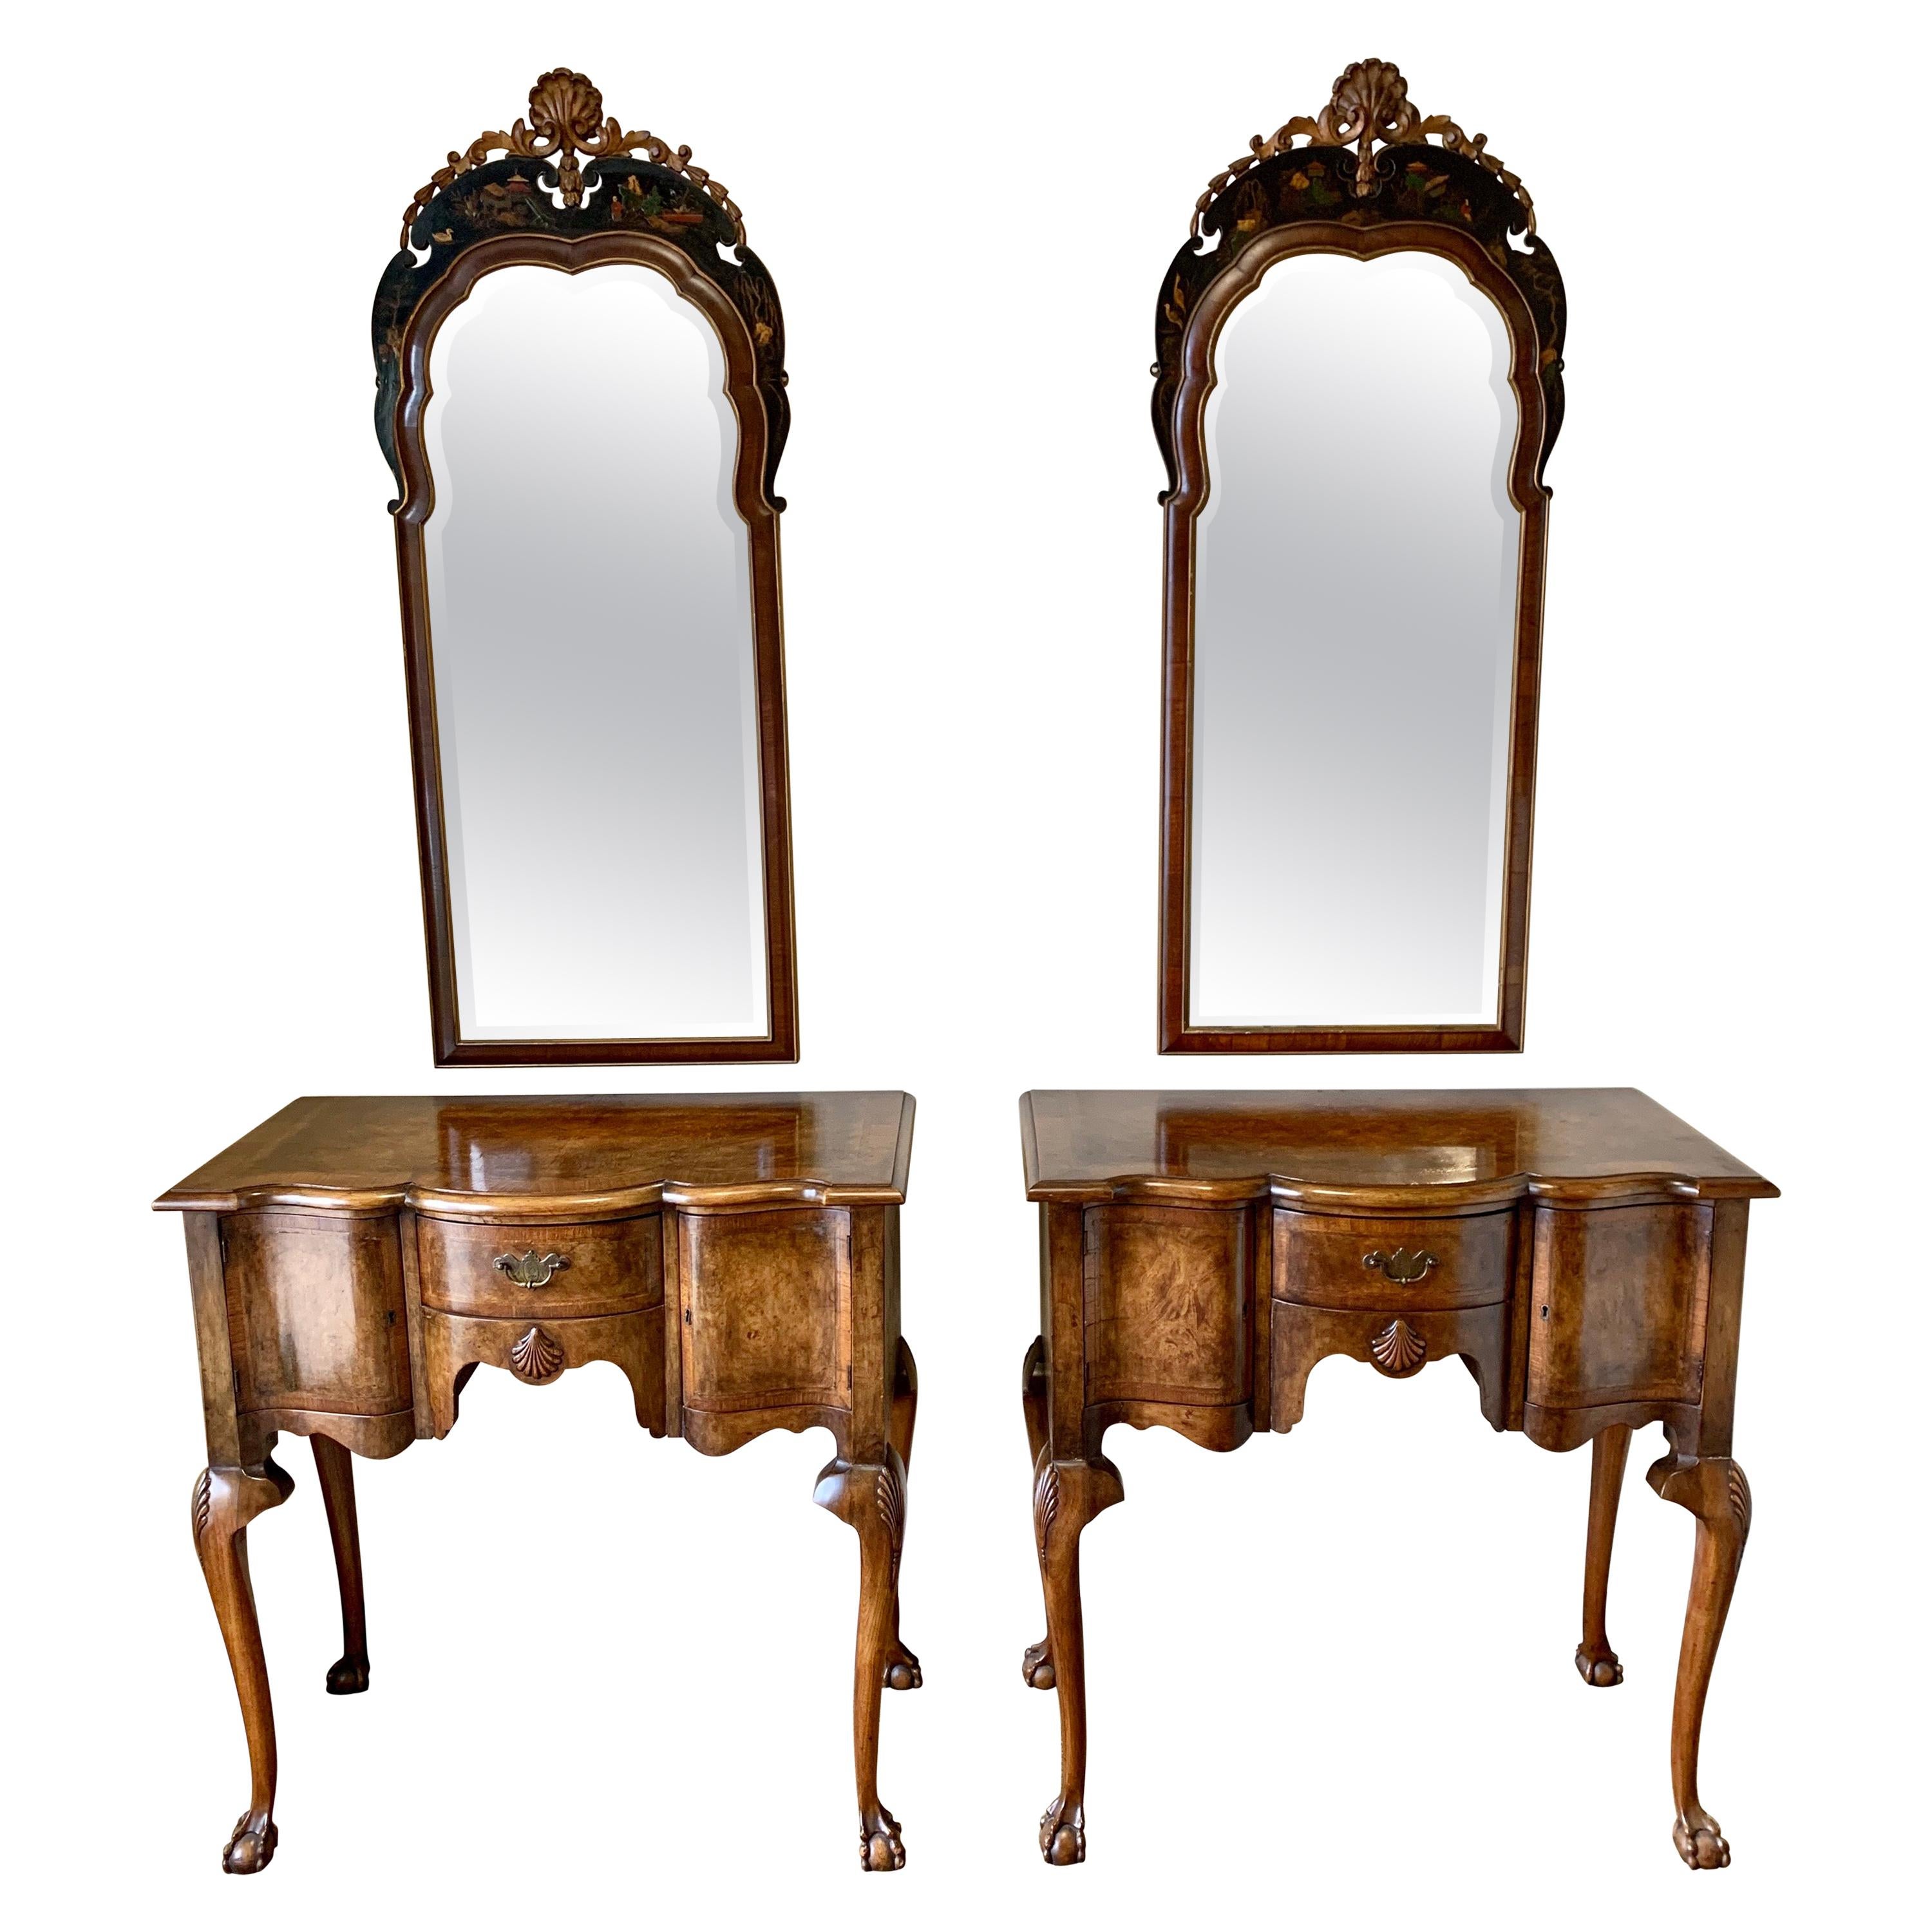 Pair of Carved Burled Walnut Console Tables and Black Chinoiserie Mirrors